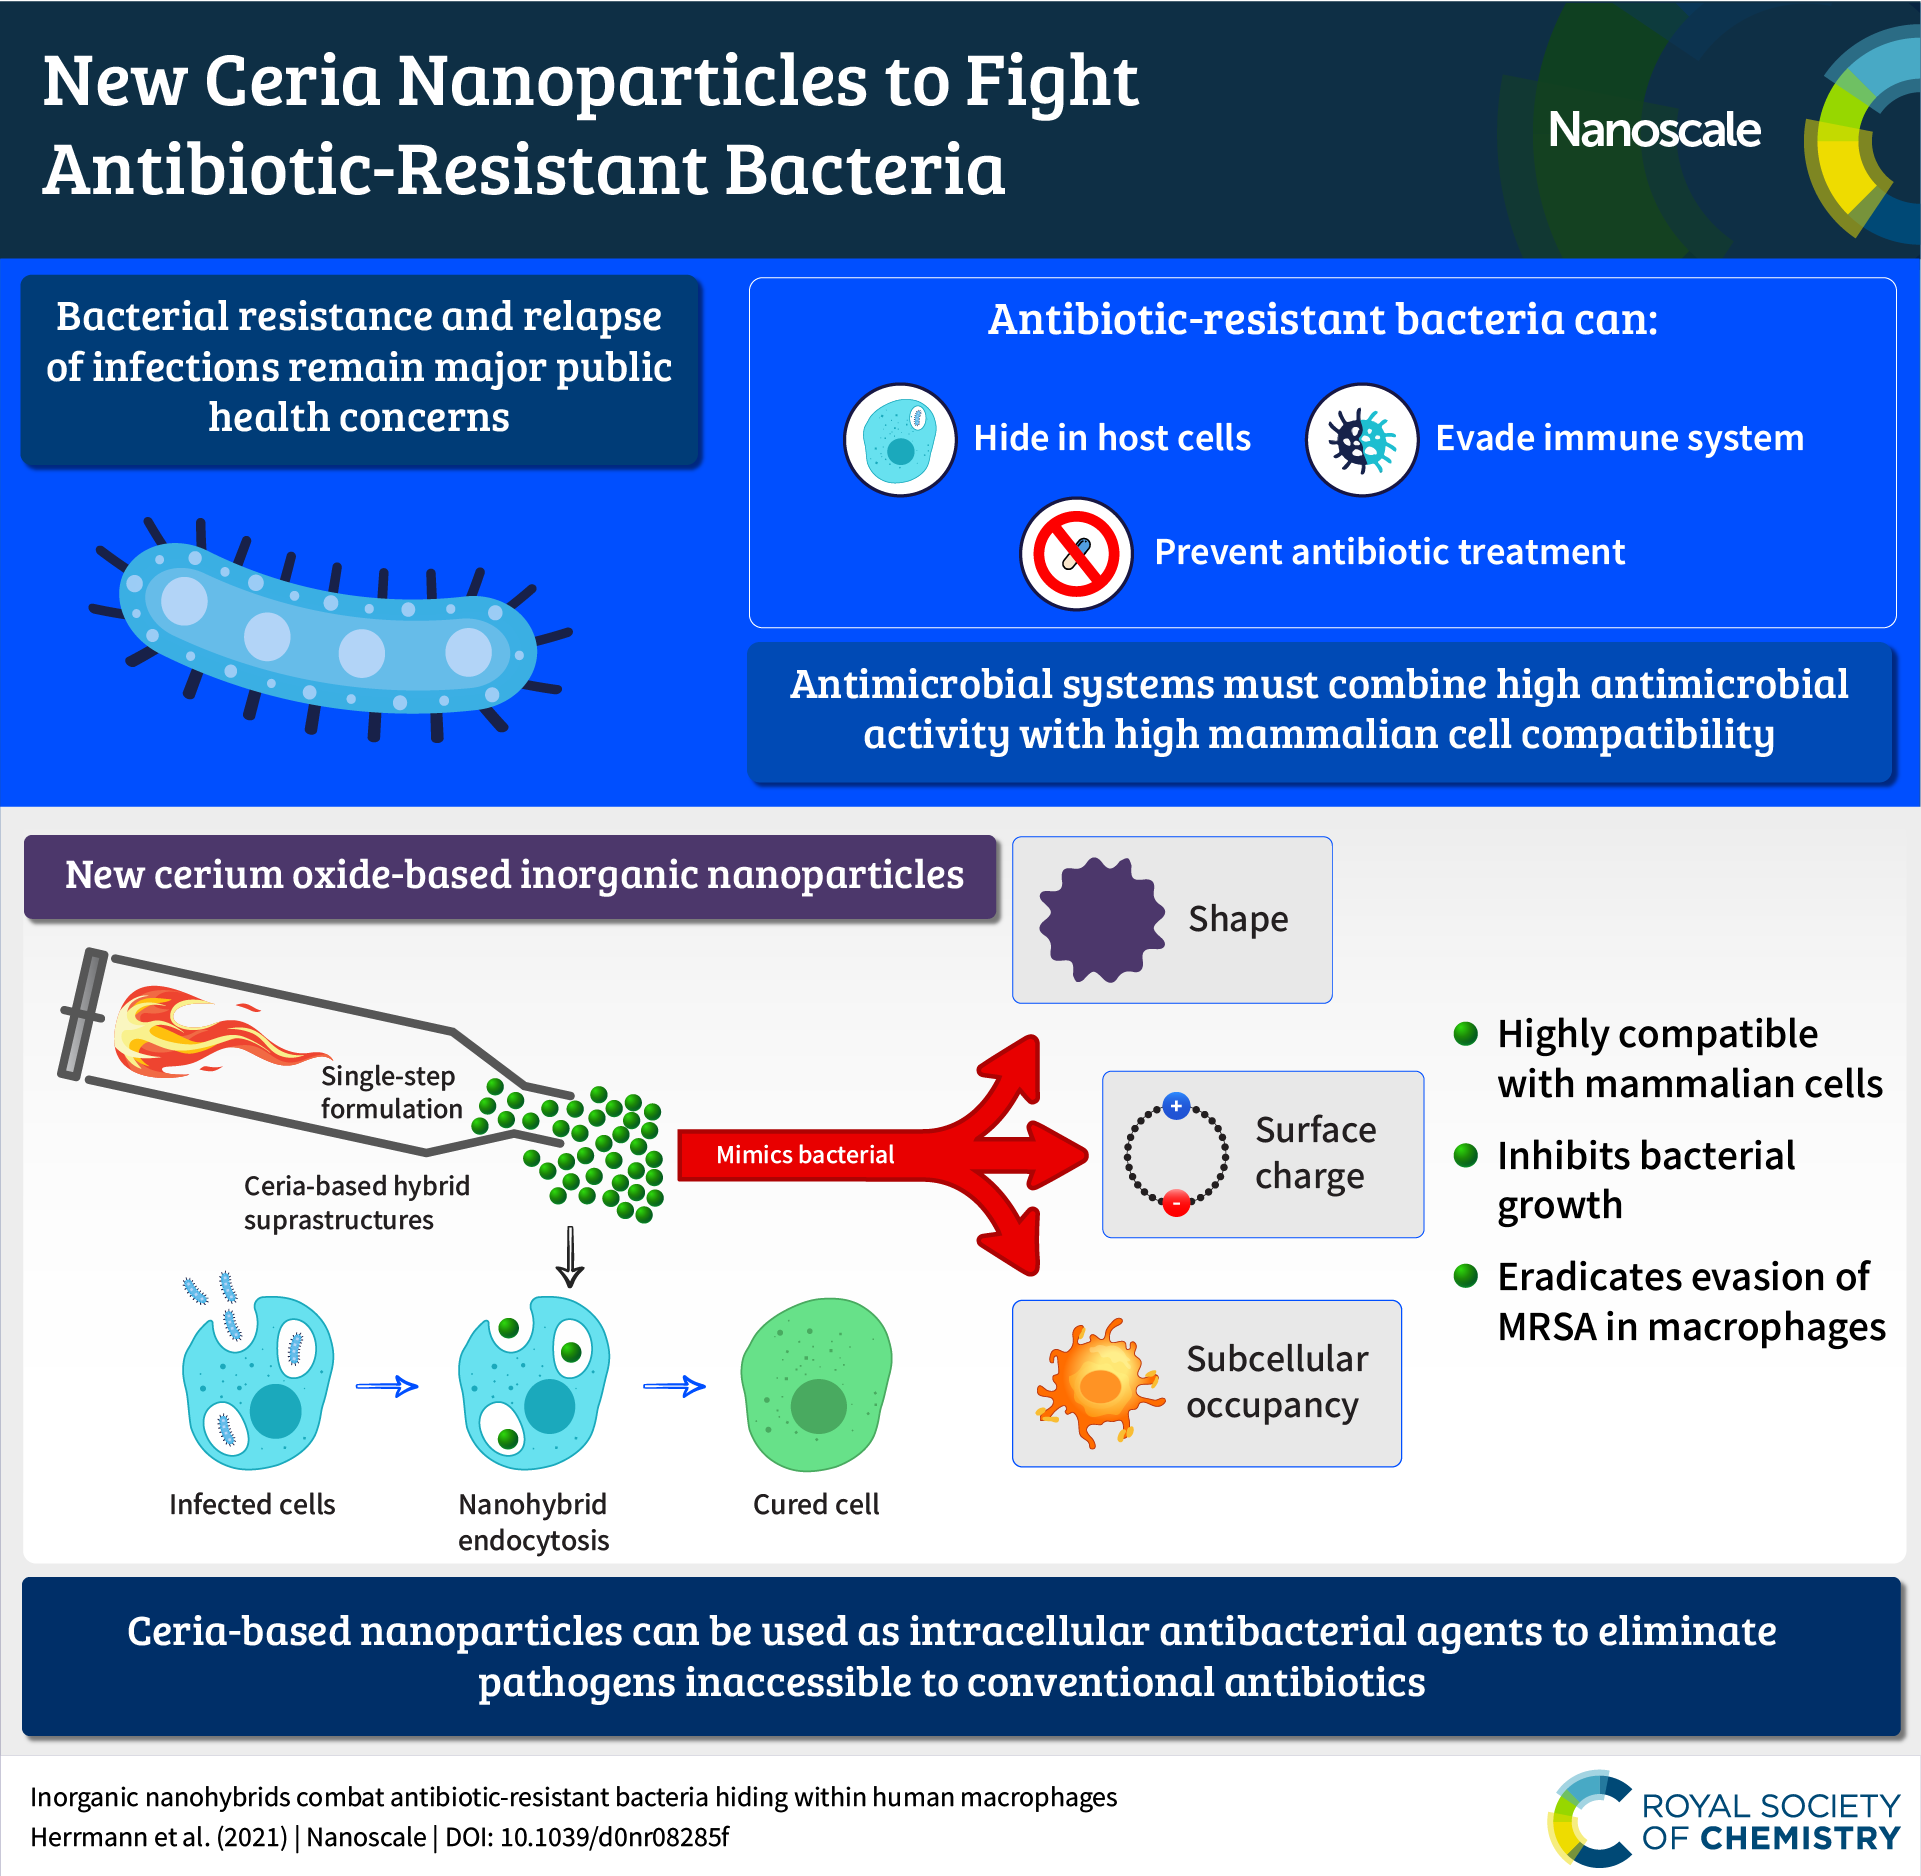 An infographic summarising the content of the article “Inorganic nanohybrids combat antibiotic-resistant bacteria hiding within human macrophages"